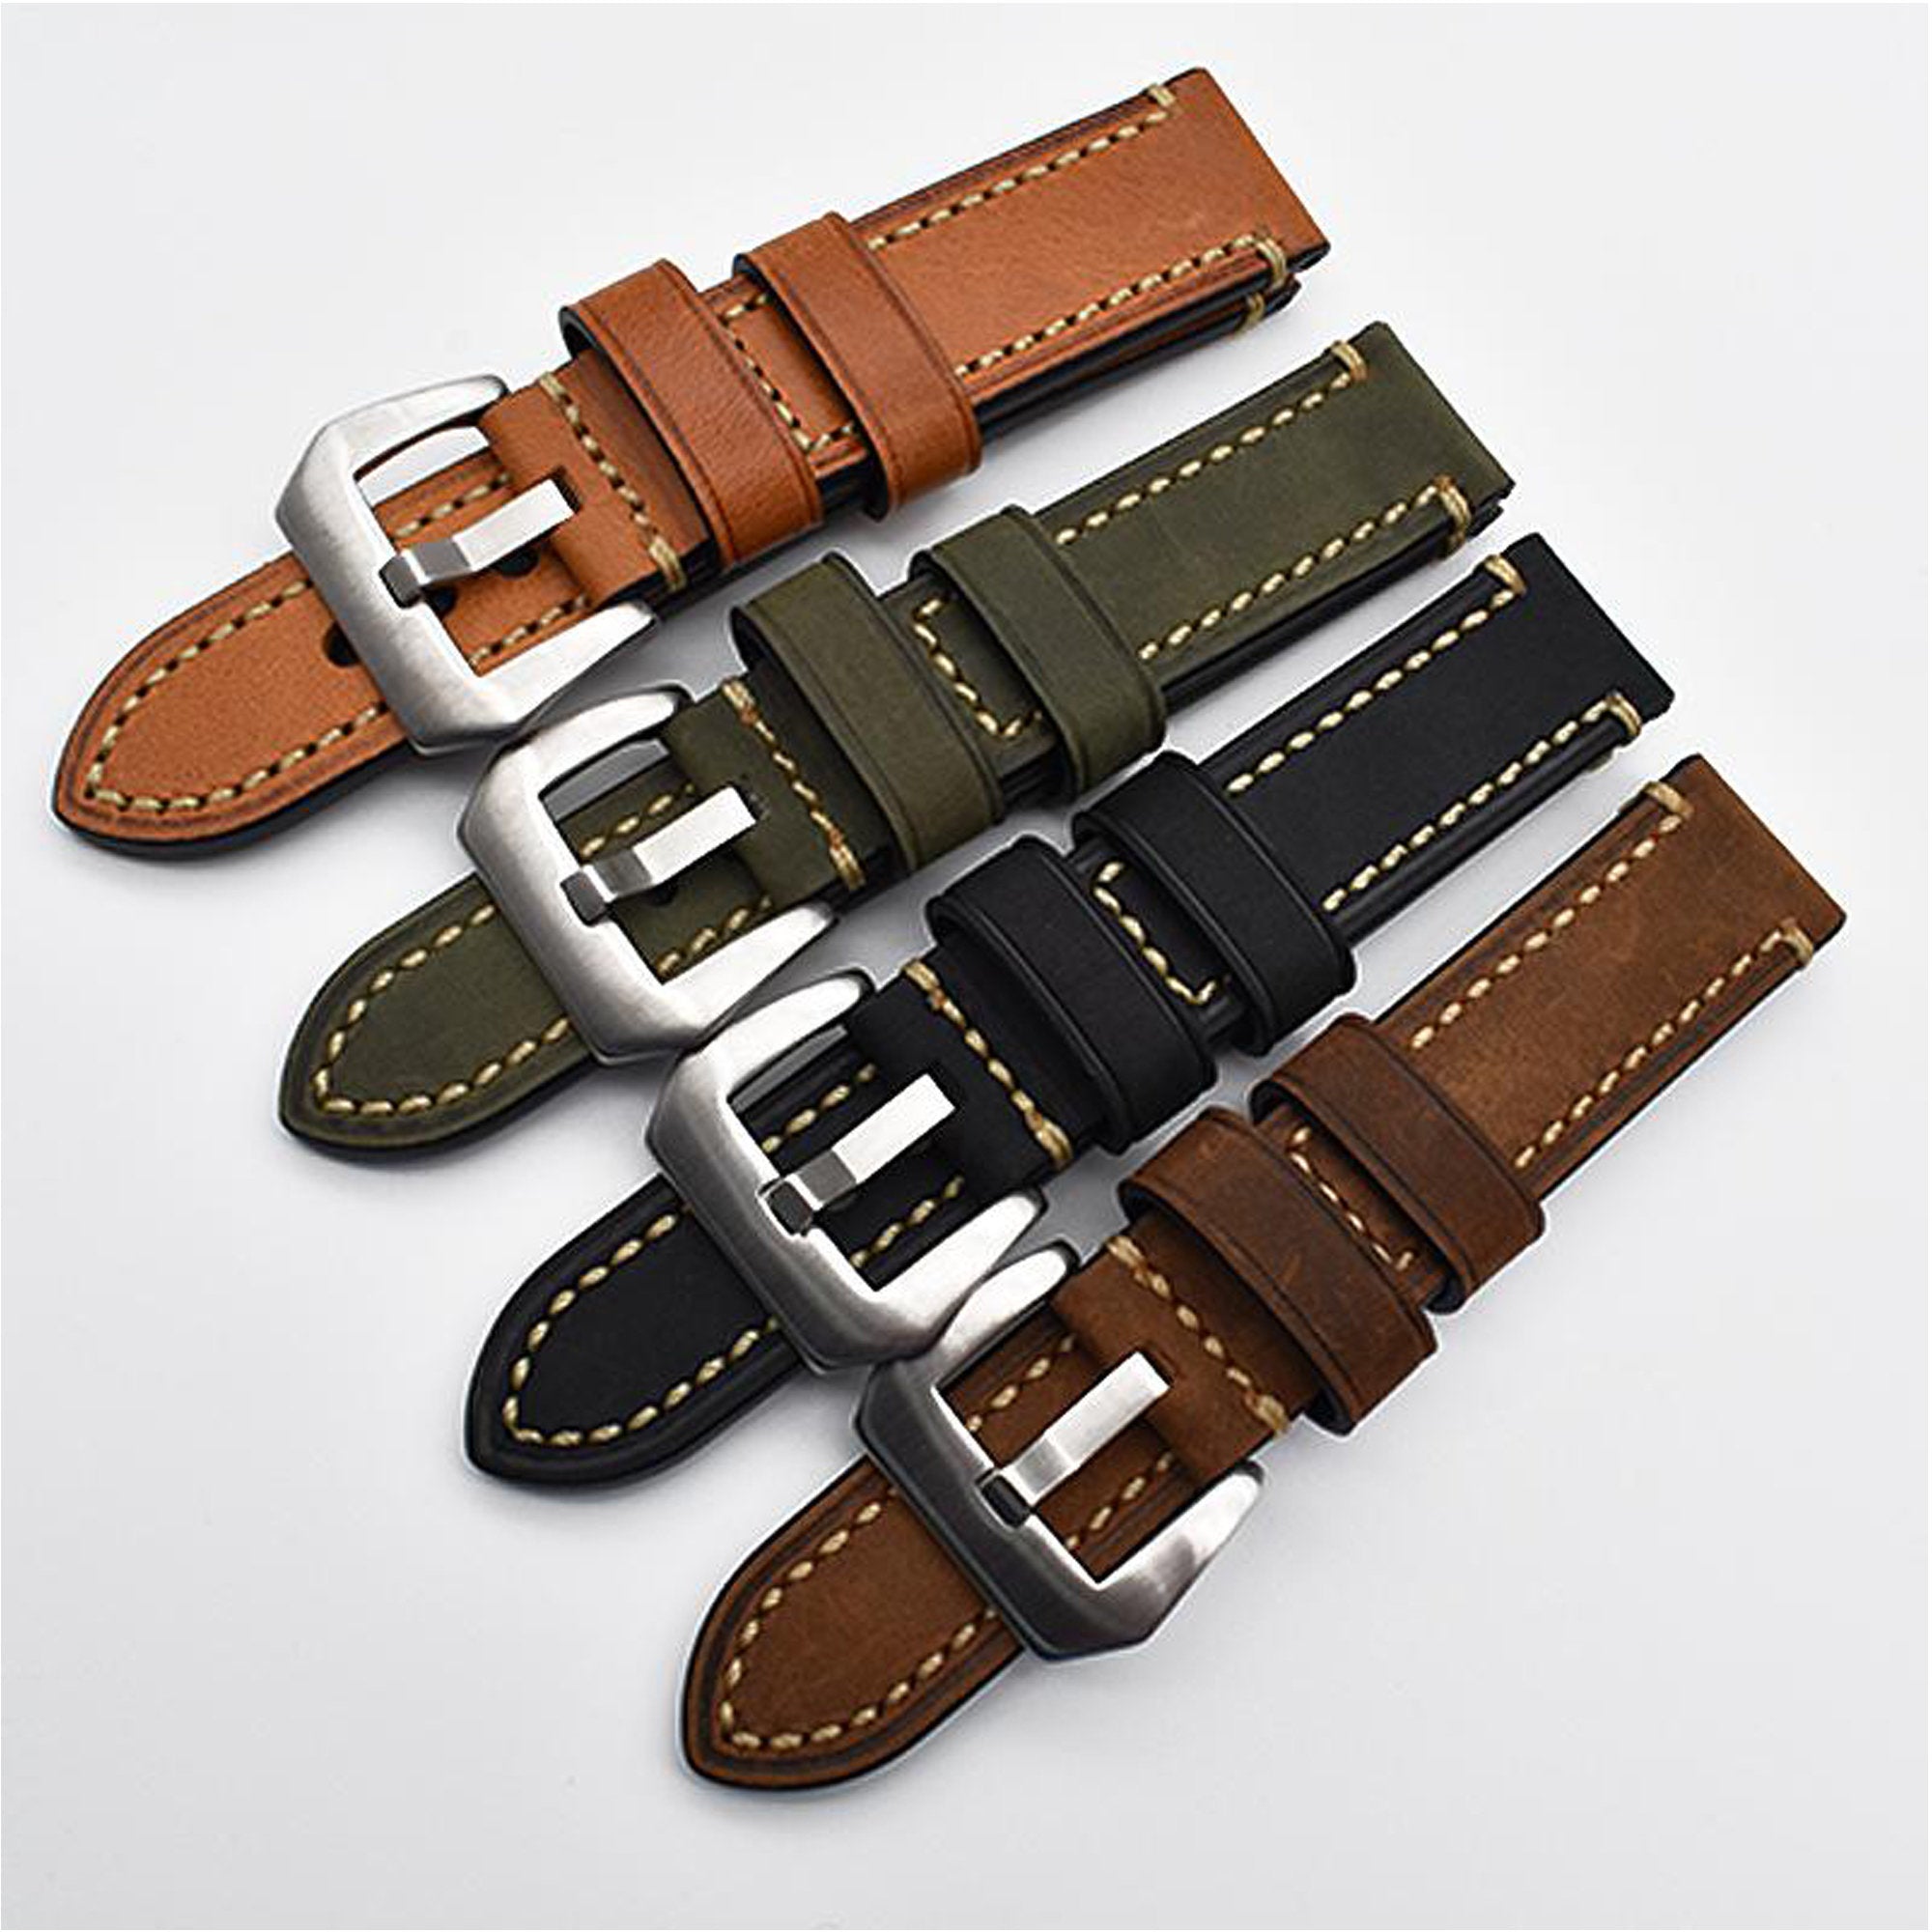 Watch Leather Bands 24 mm Band/Strap Width